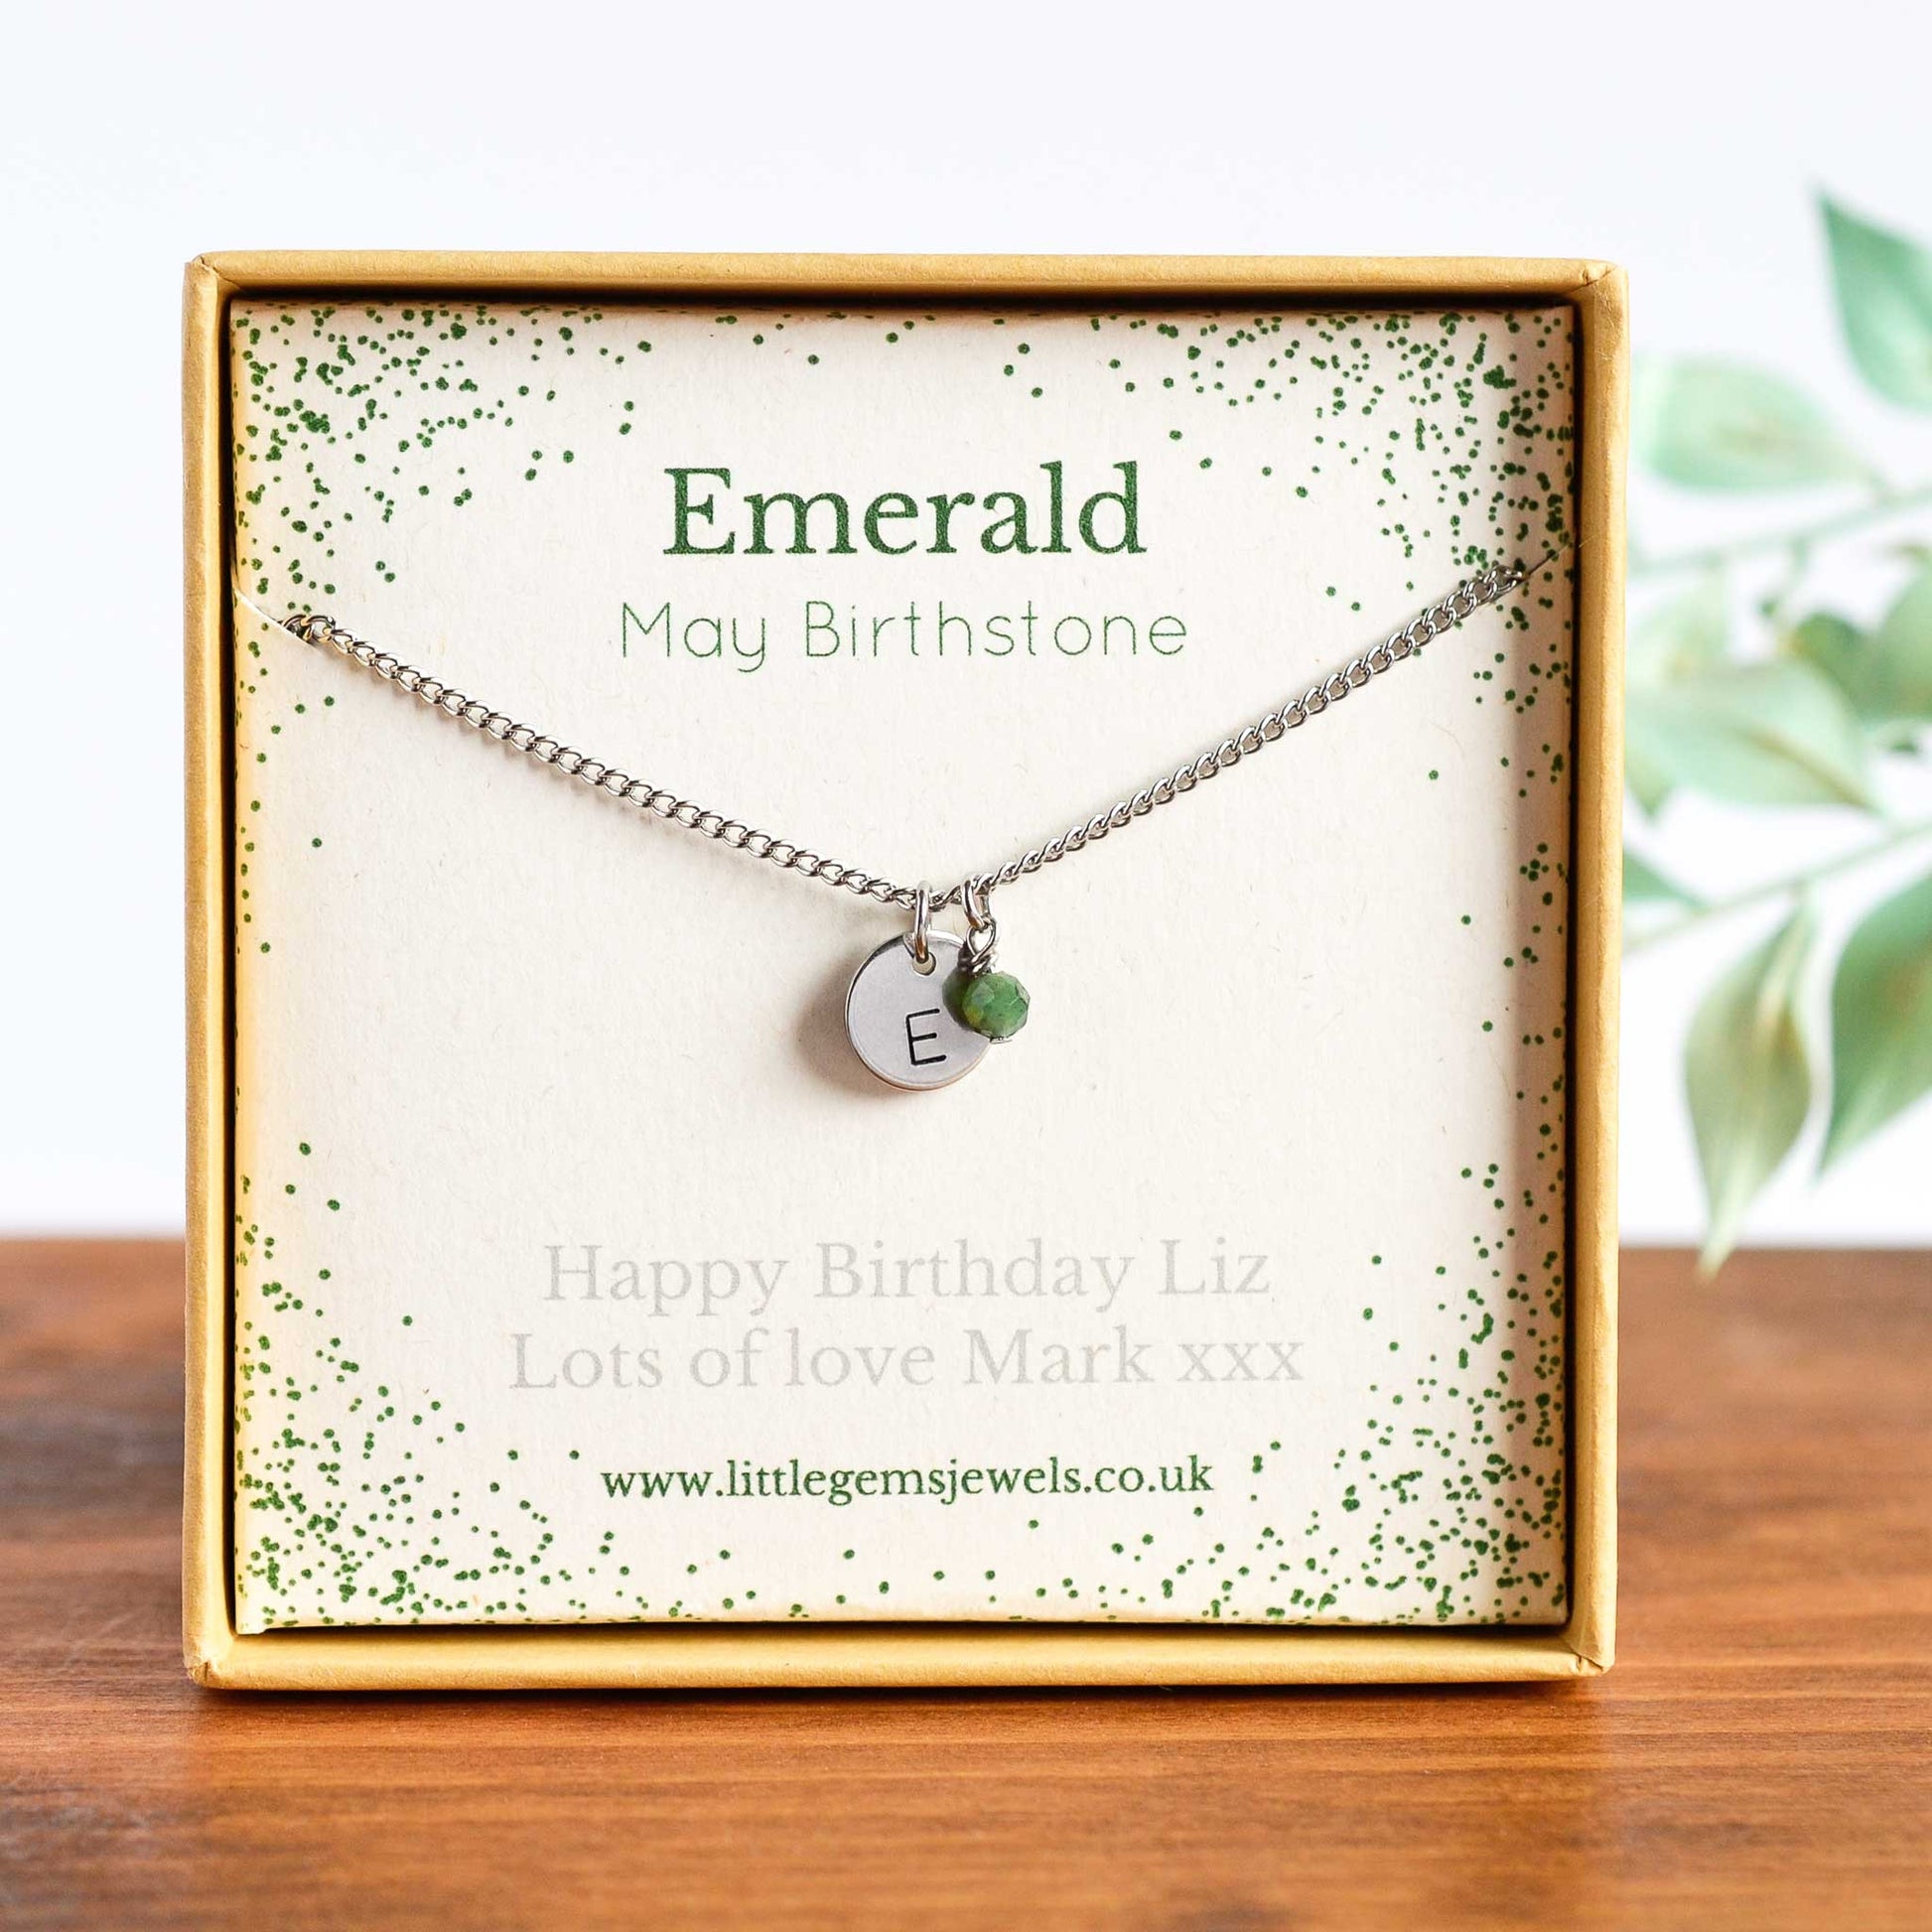 May Birthstone necklace with initial charm & personalised gift message in eco friendly gift box